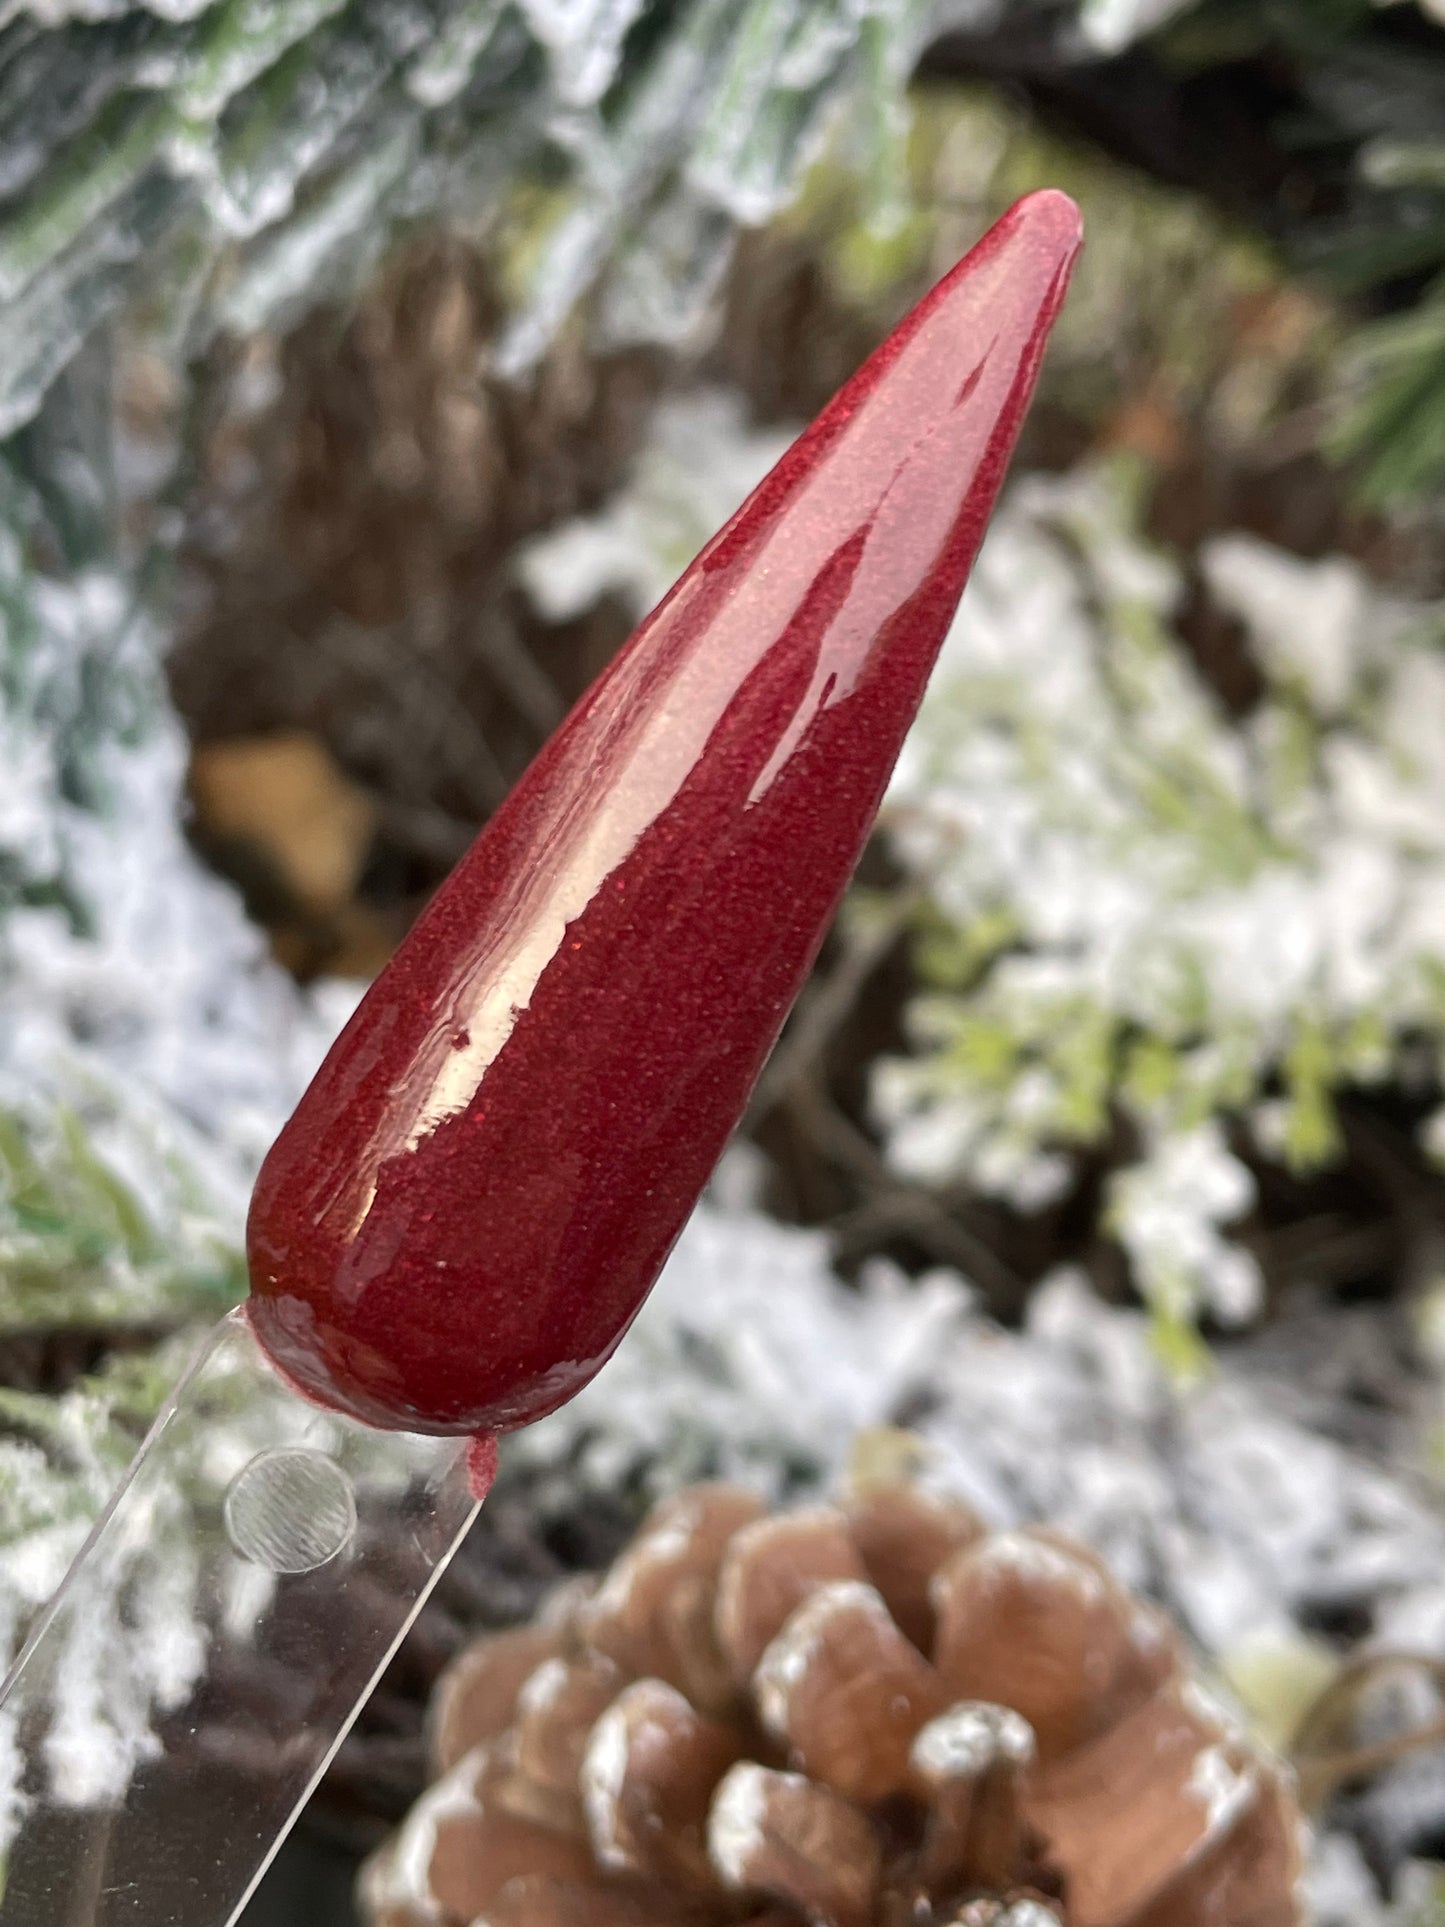 Frosted Cranberry